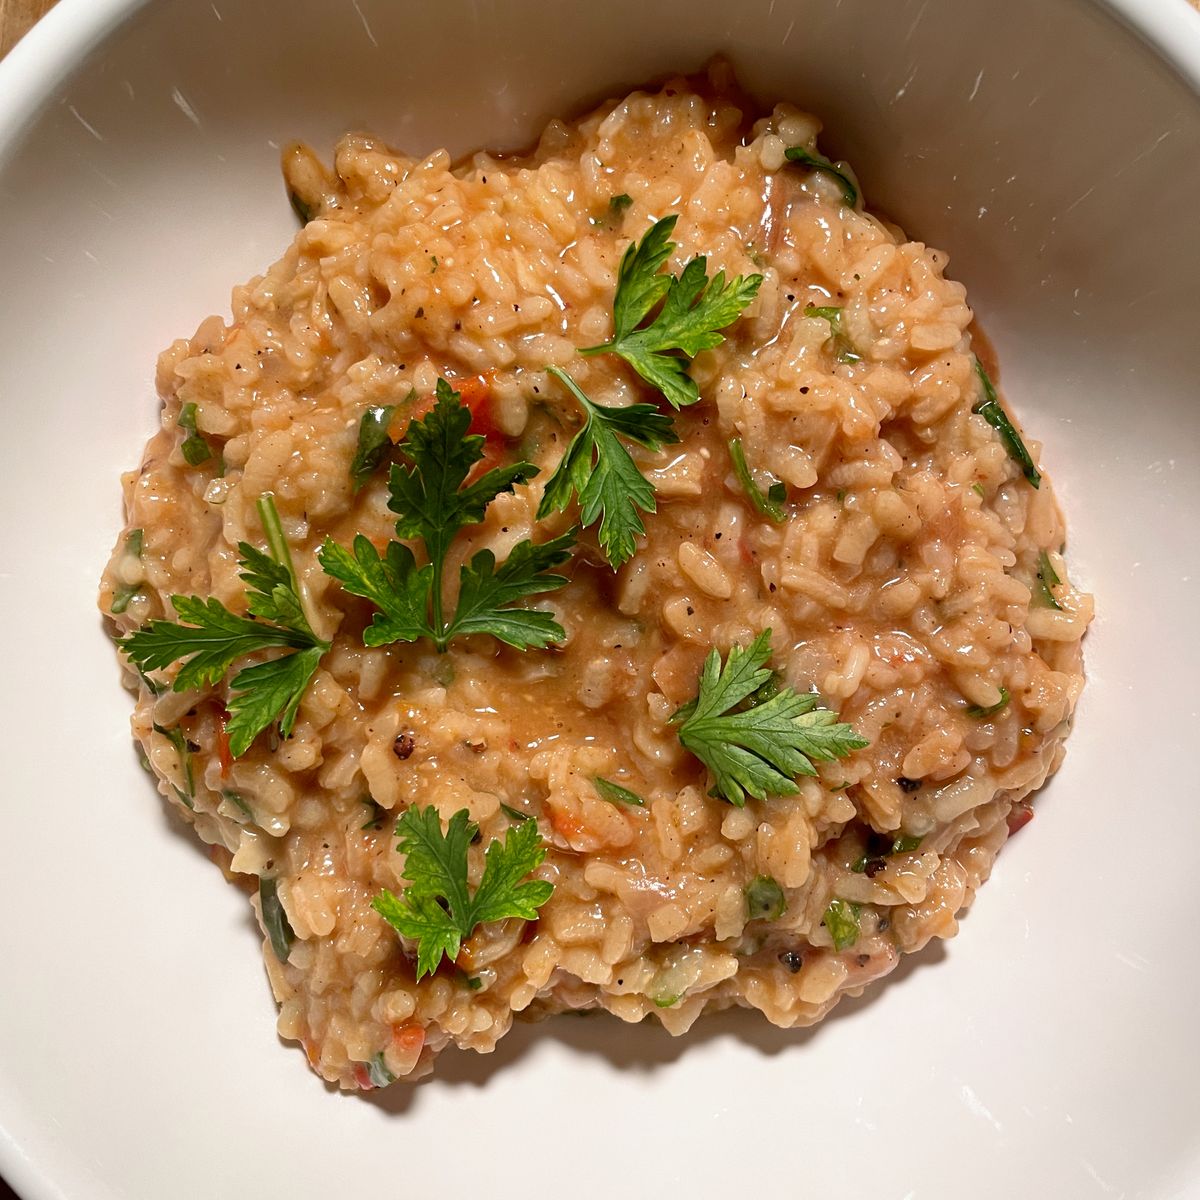 Heirloom Tomato Risotto with Herbs